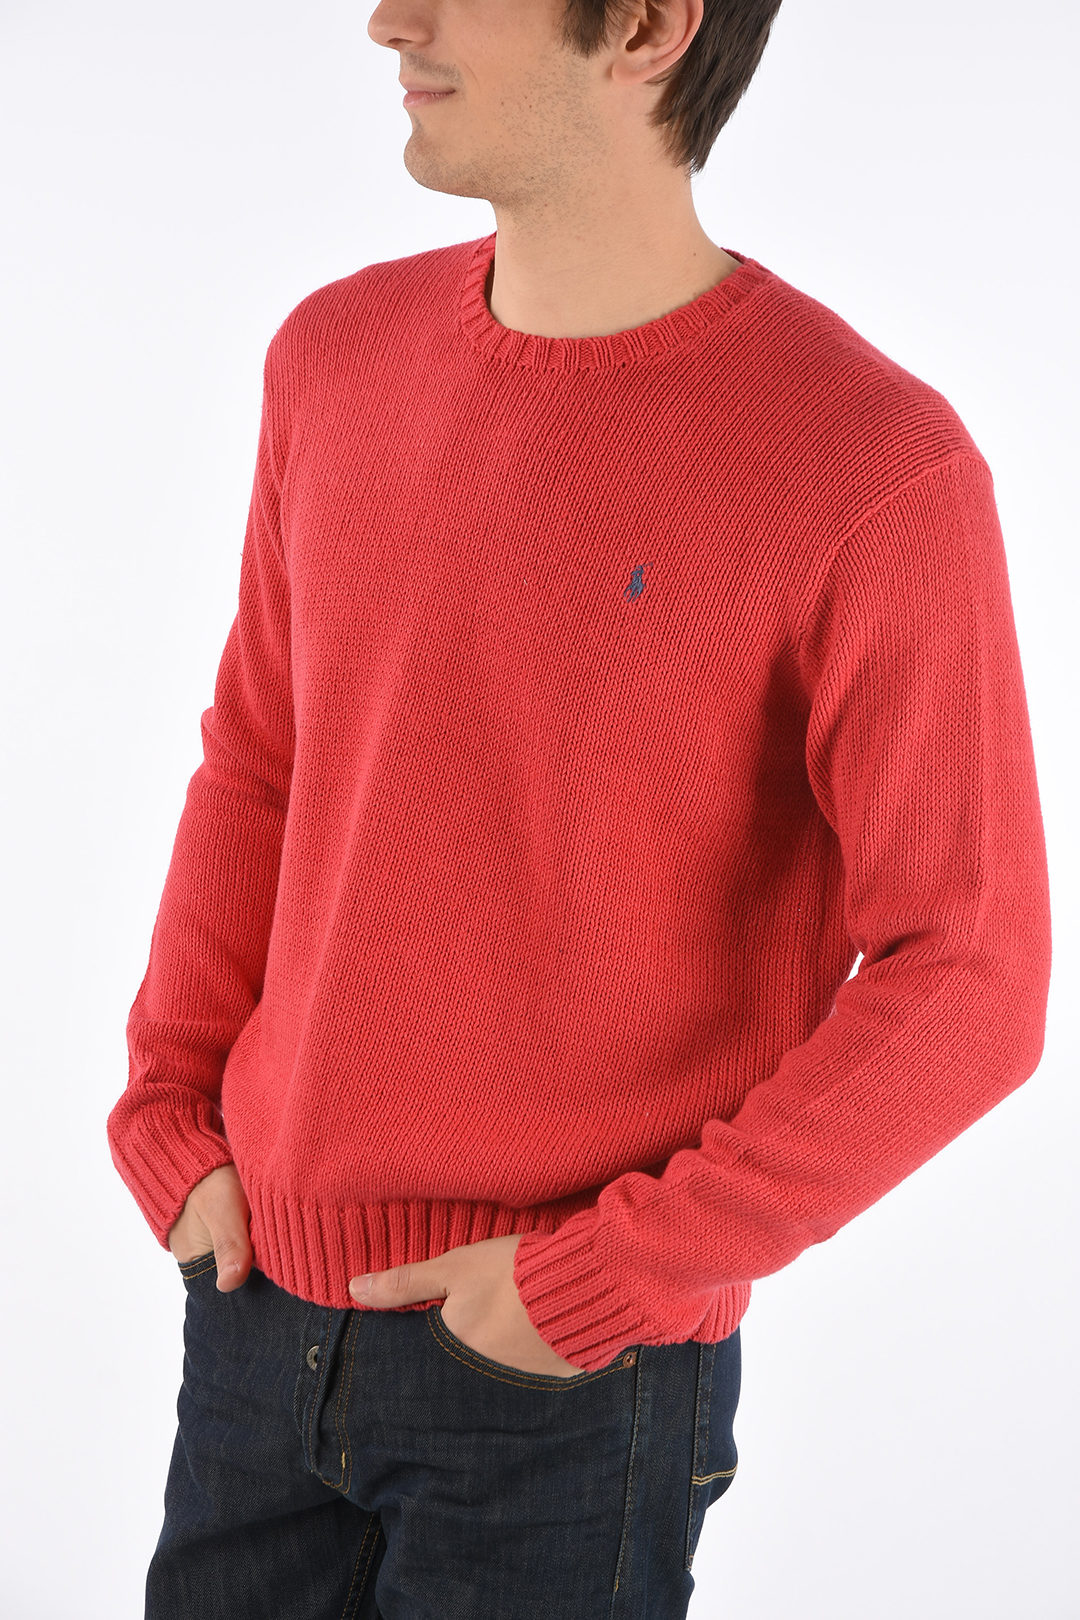 Polo Ralph Lauren Linen and Cotton Cable Knit Sweater men - Glamood Outlet